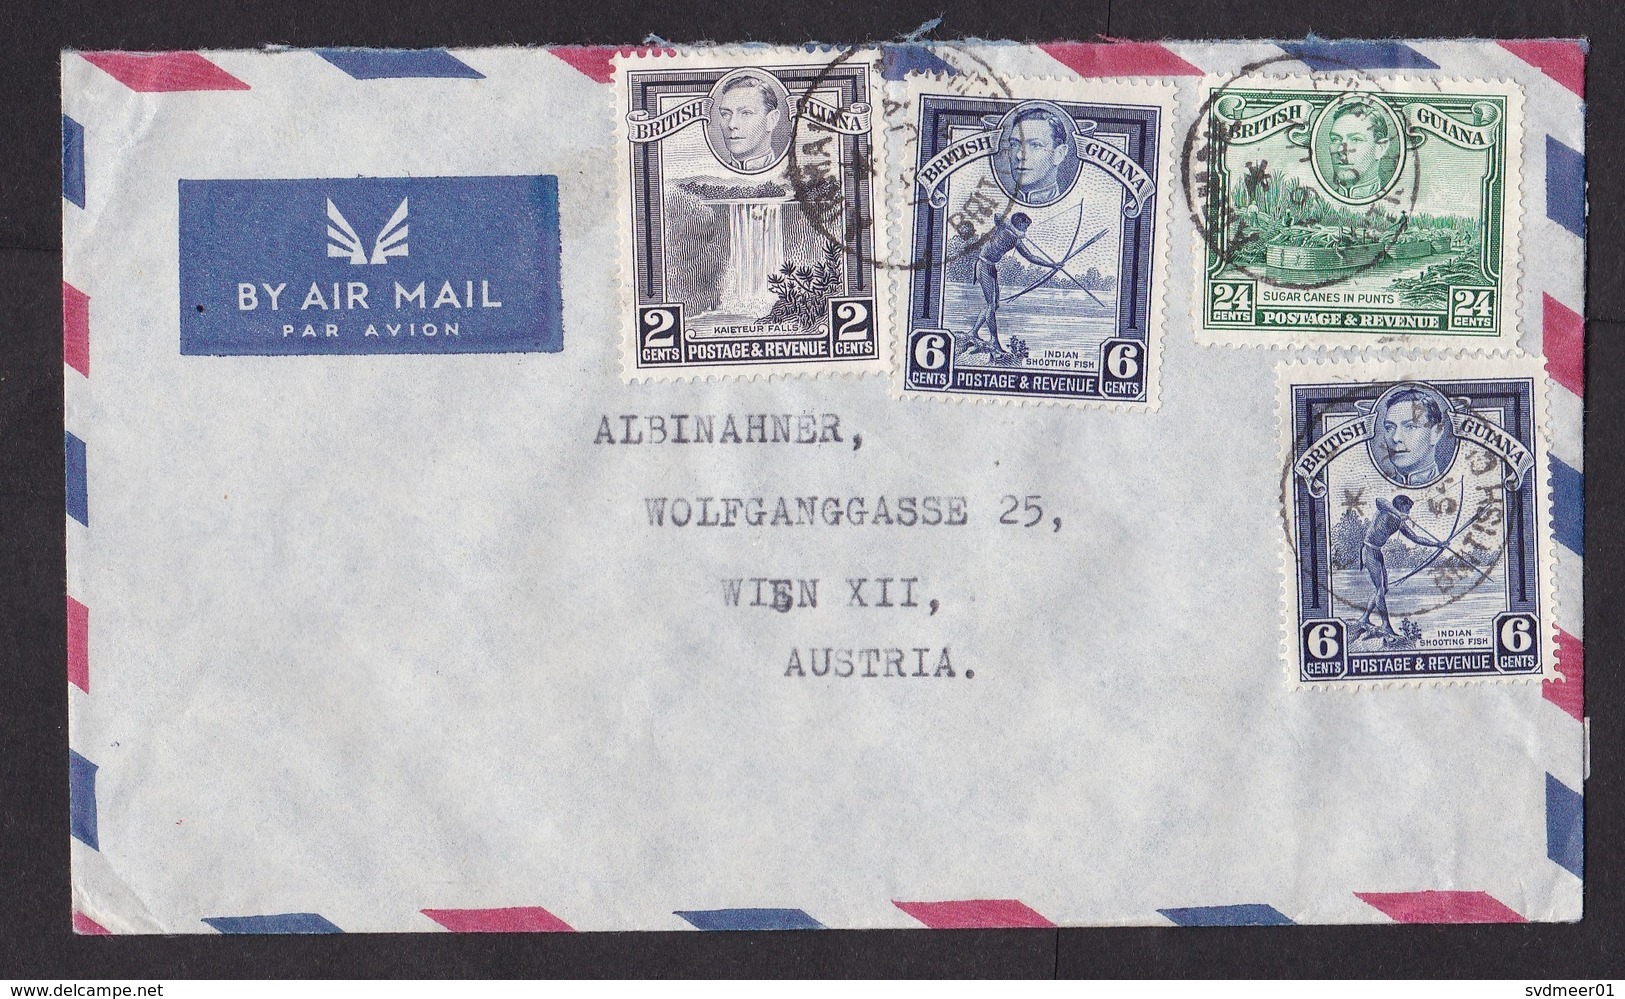 British Guiana: Airmail Cover To Austria, 1954, 4 Stamps, George VI, Waterfall, Fishing, Sugar Cane Ship (traces Of Use) - Brits-Guiana (...-1966)